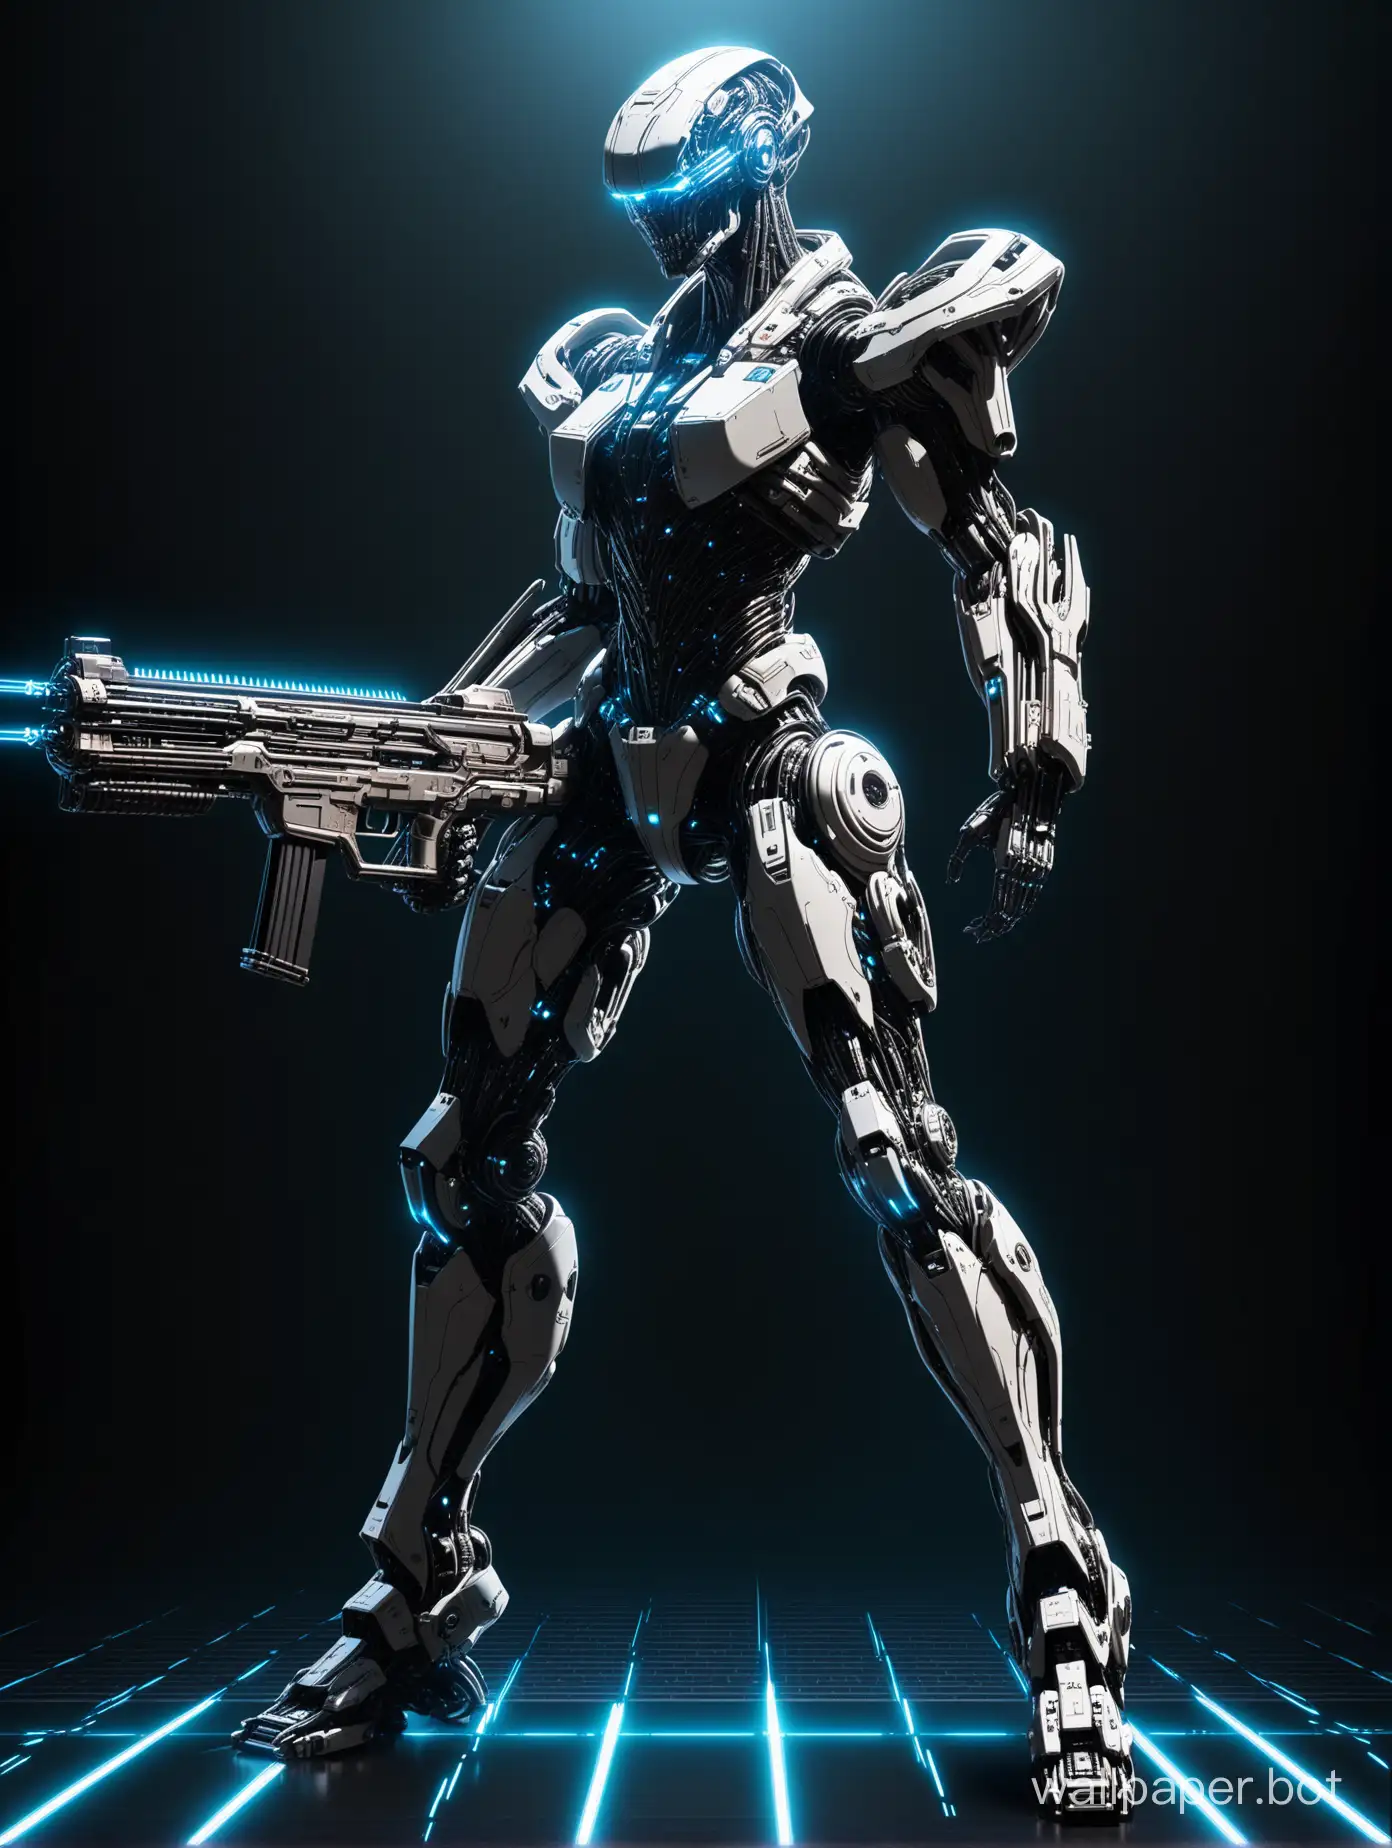 Futuristic-Cybernetic-Soldier-Armed-with-Rail-and-Chain-Guns